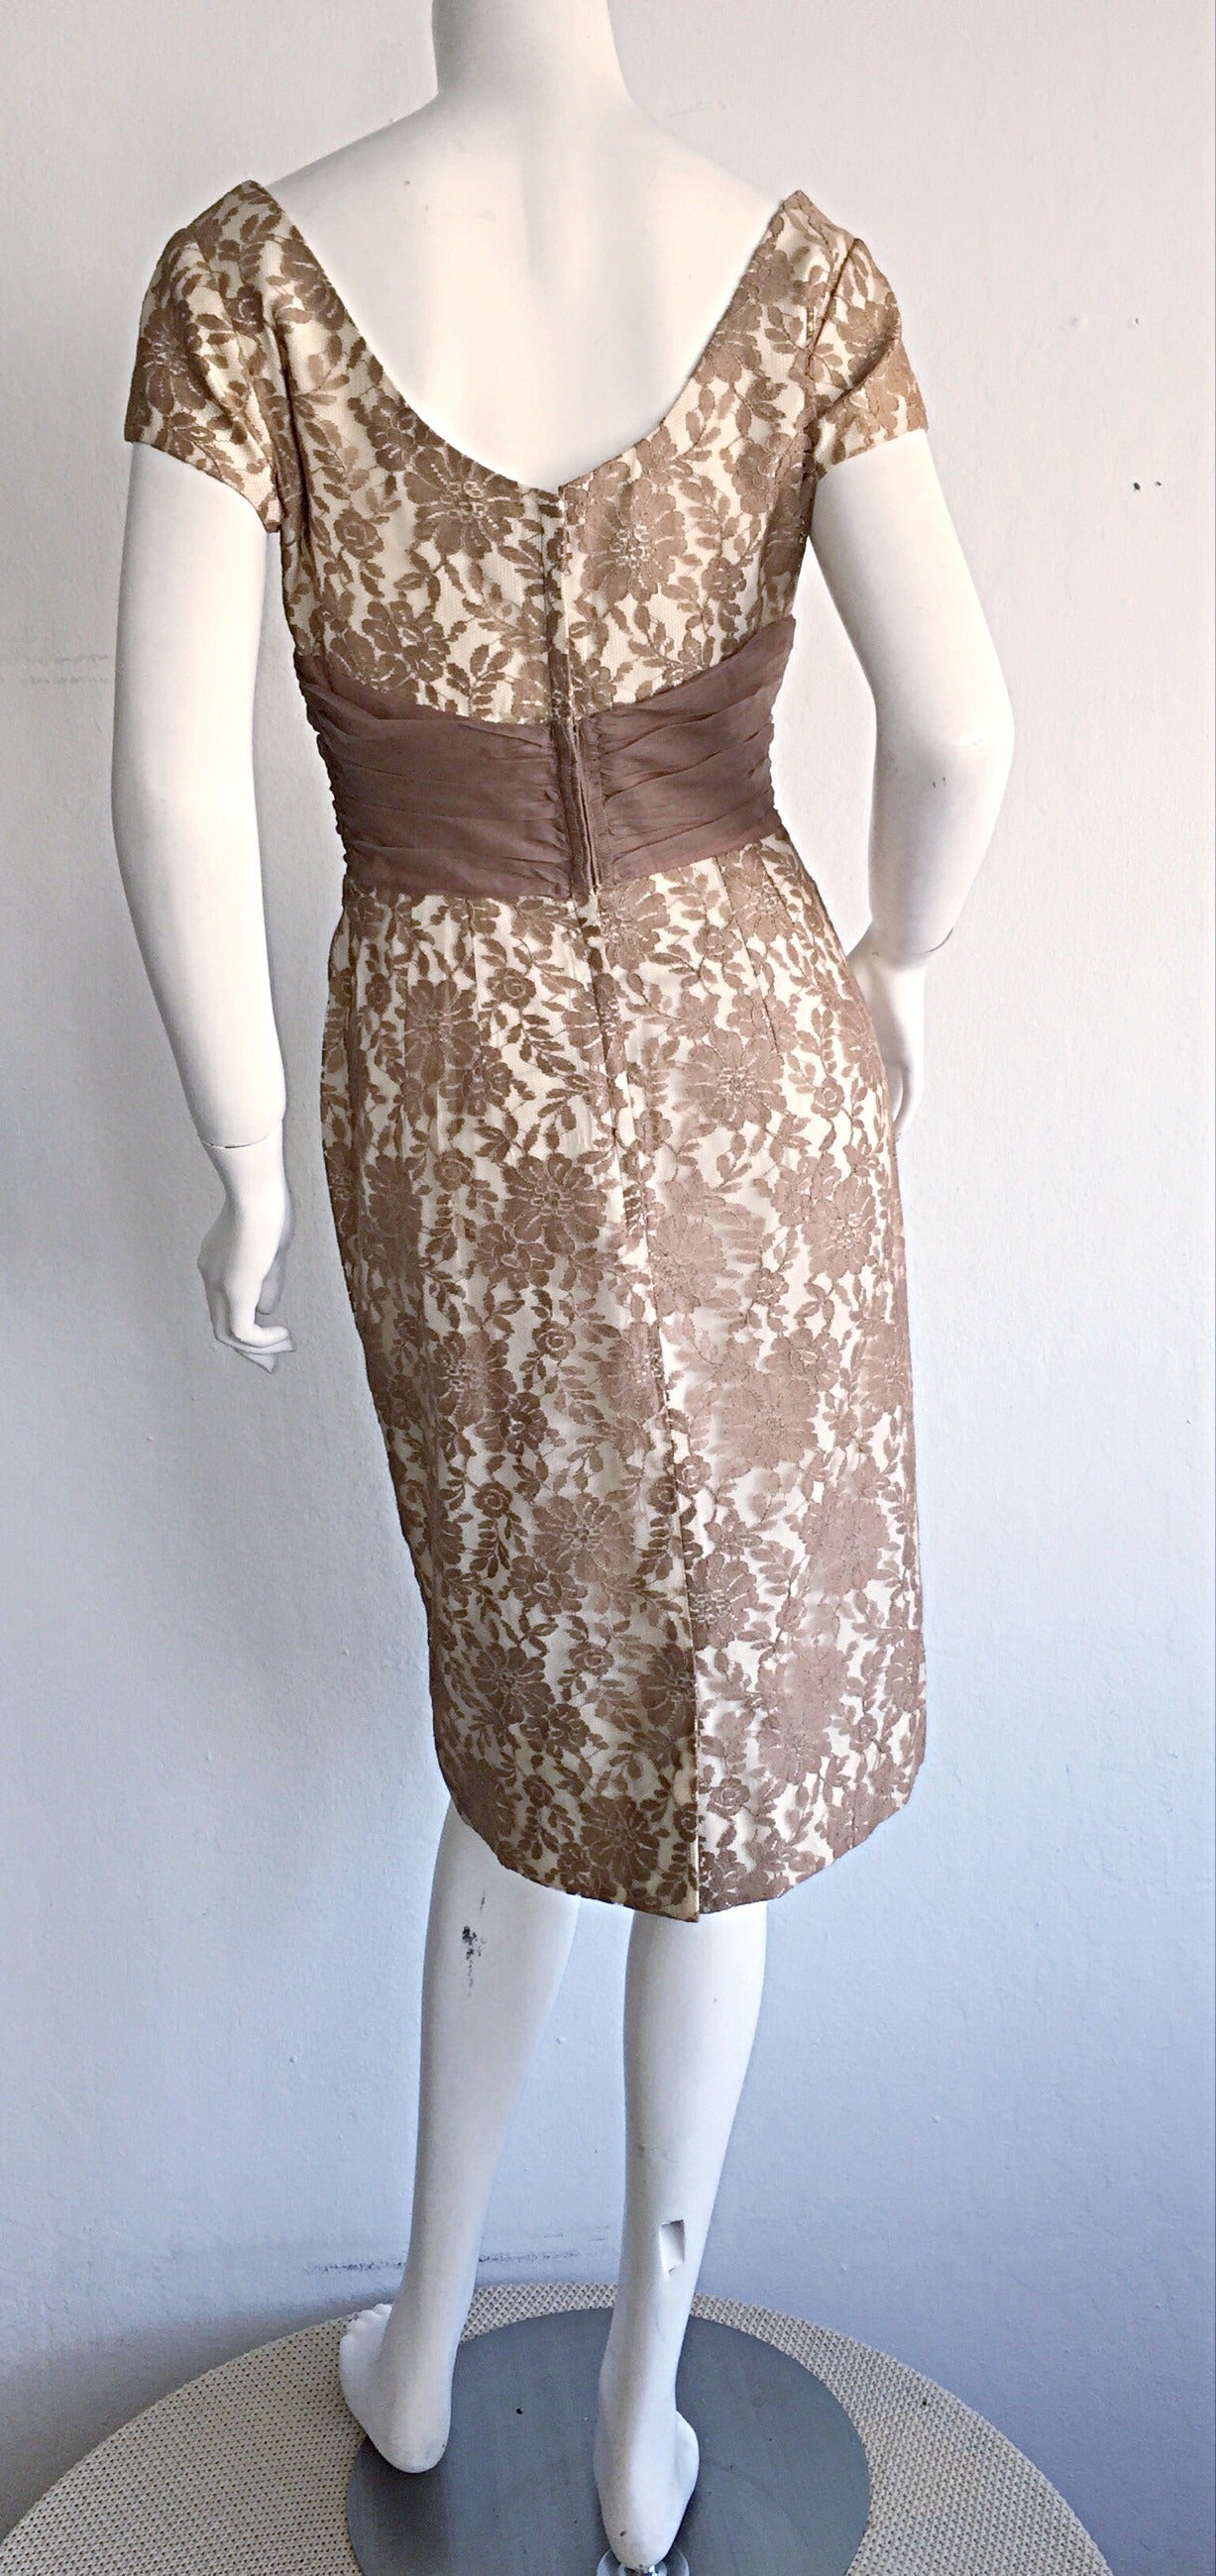 Women's Incredible 1950s French Lace Bombshell Chantilly Lace Wiggle Dress + Cape For Sale